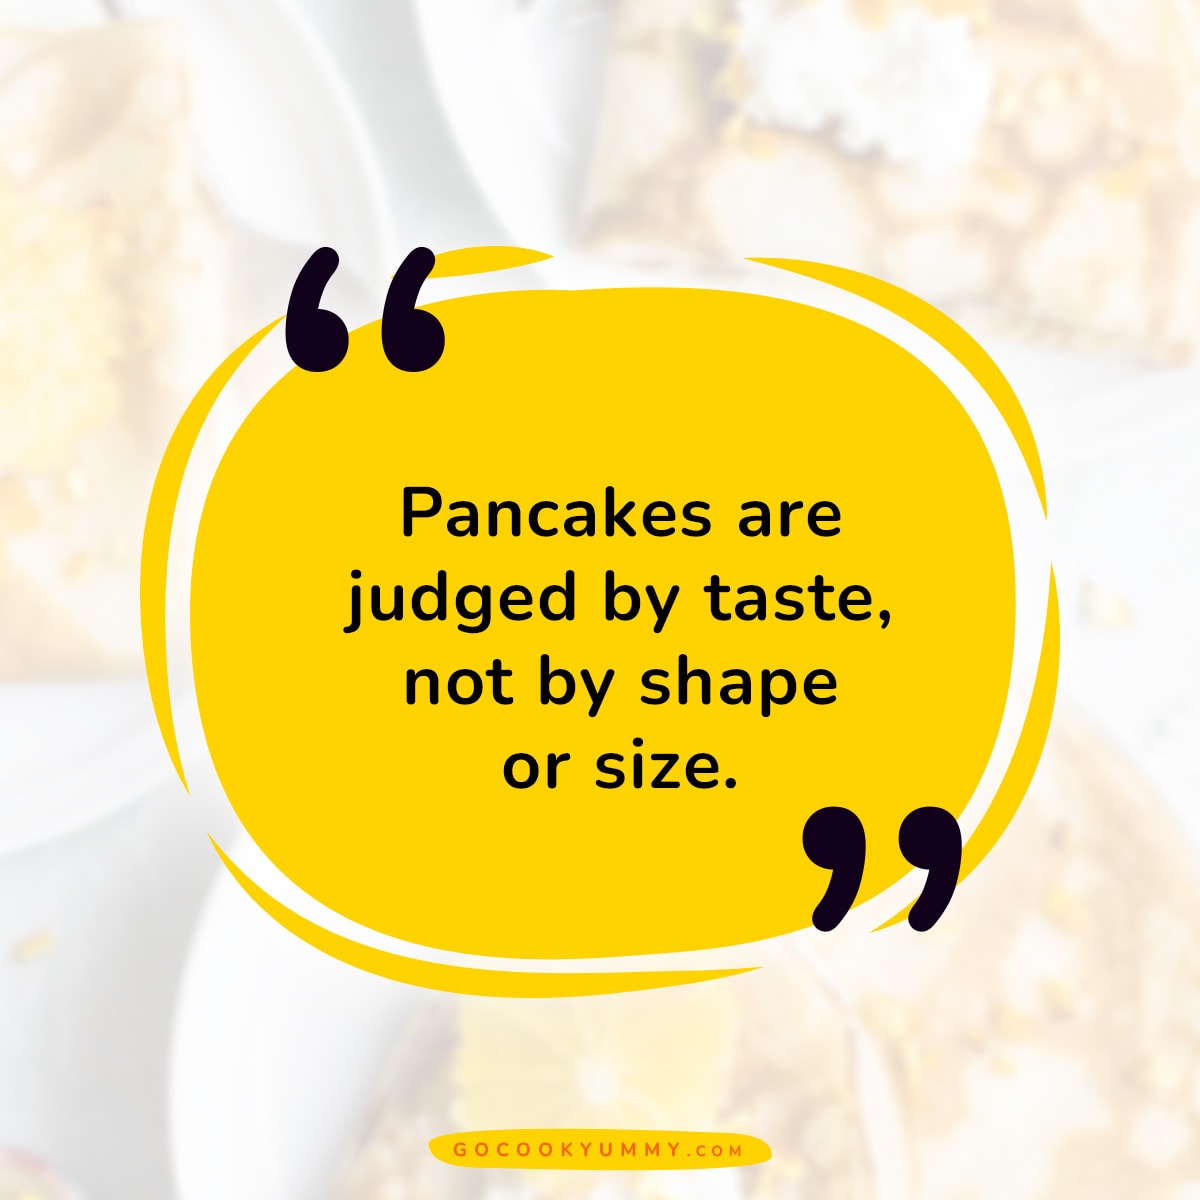 Pancakes are judged by taste, not by shape or size.